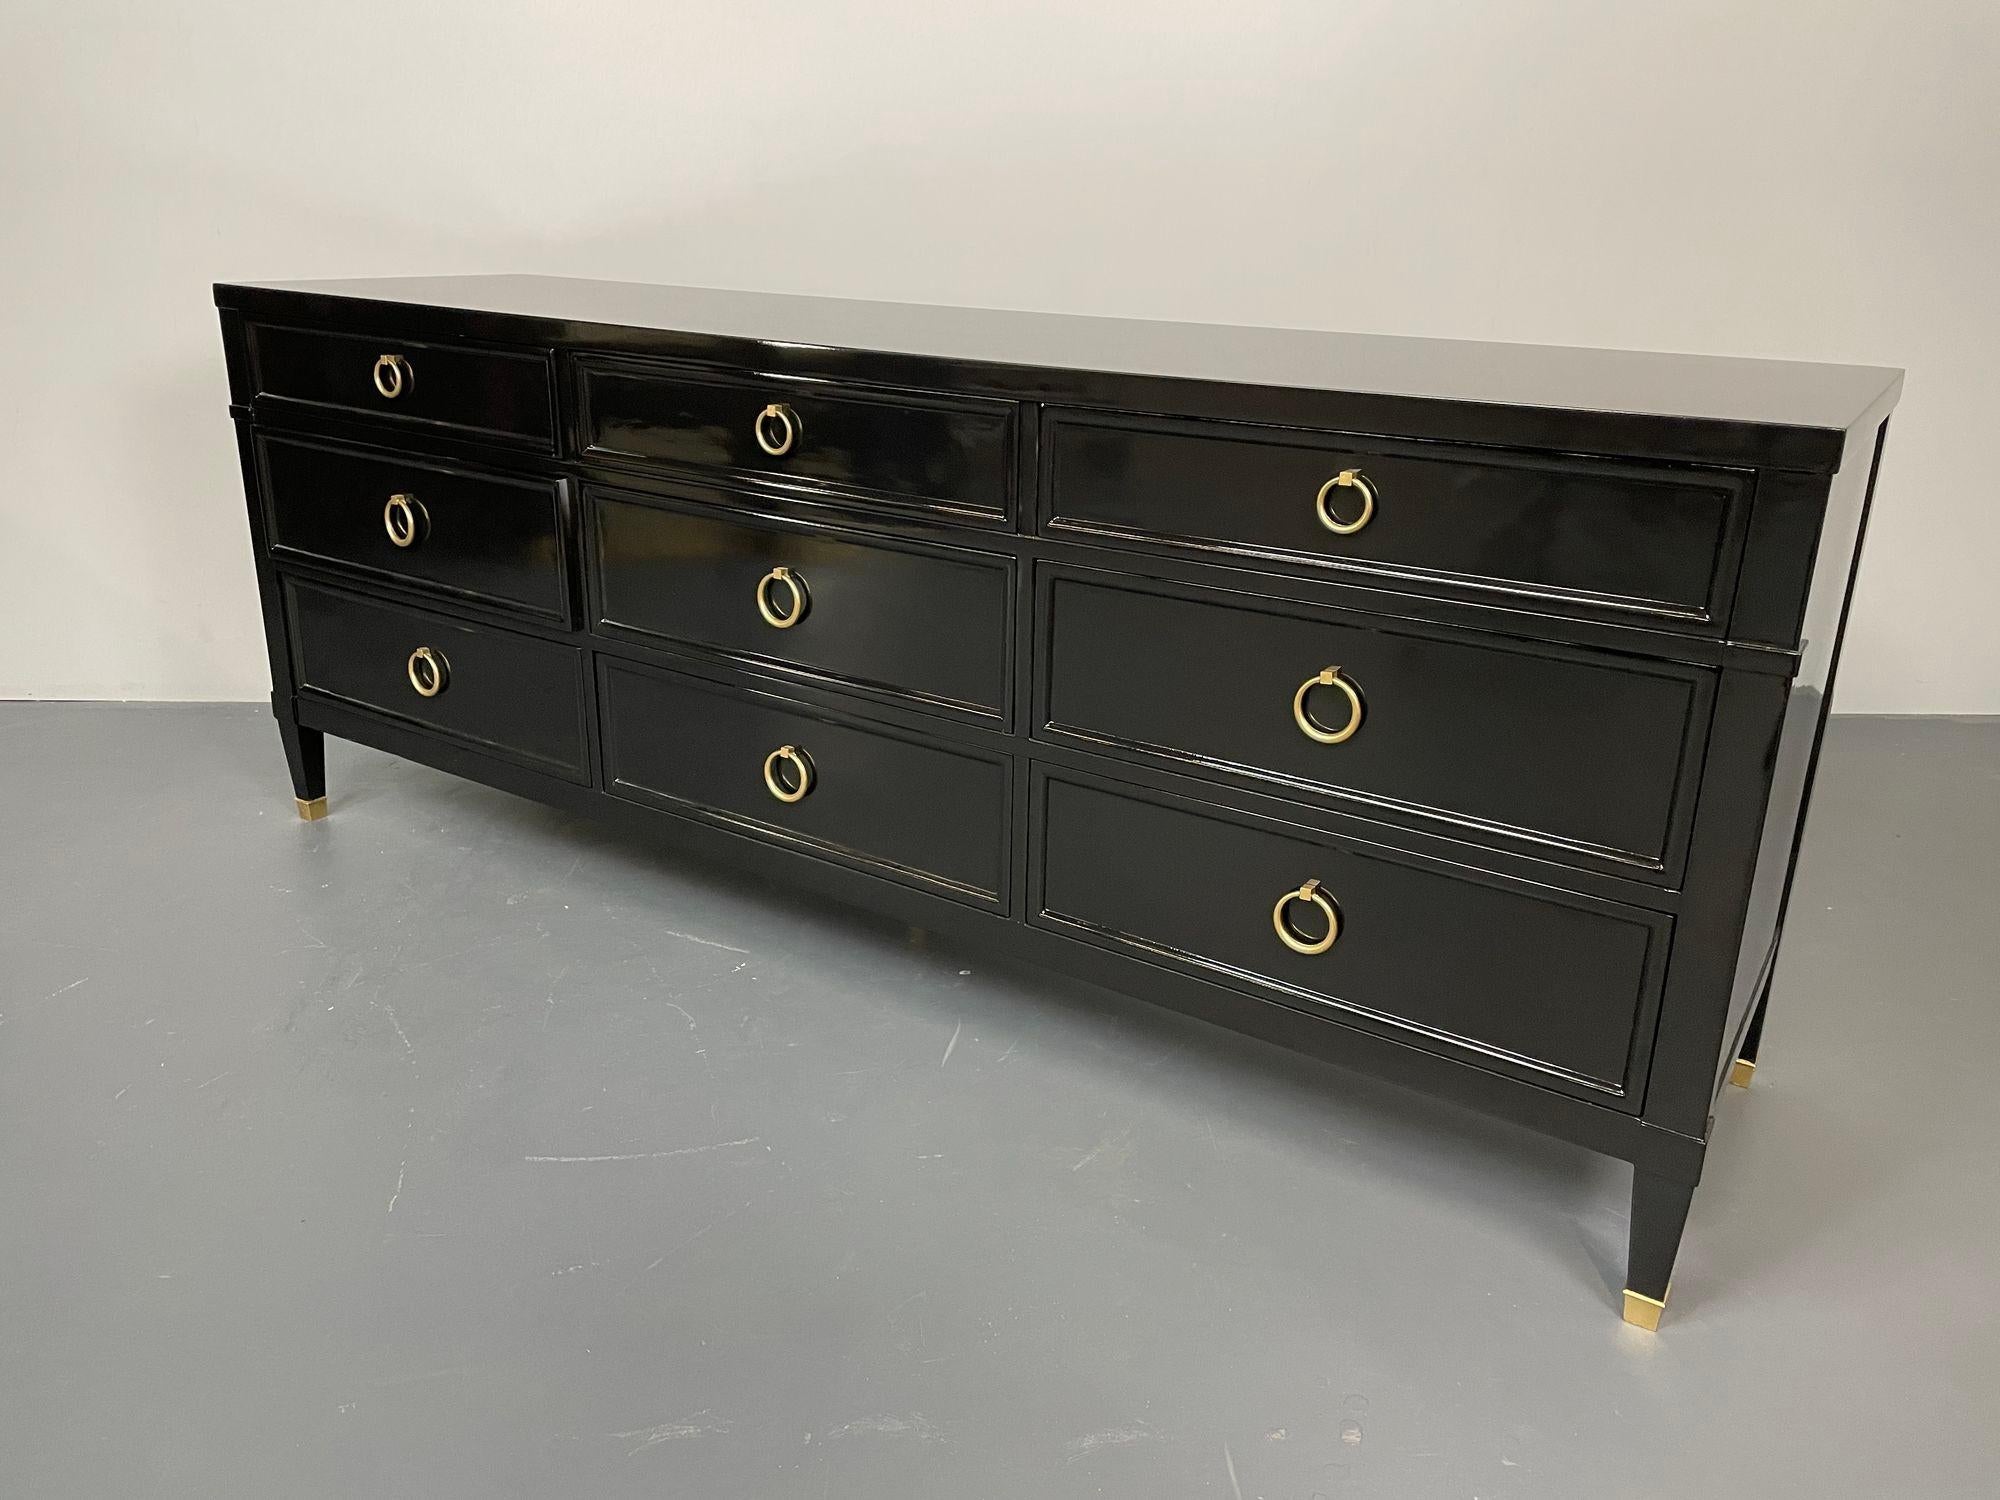 Regency Style Ebony Lacquered Chest, Dresser or Sideboard by Baker. 
A stunning, recently lacquered dresser by Baker for Milling Road. This nine drawer chest has bronze circular pulls on all drawers and is supported by tapering legs on bronze